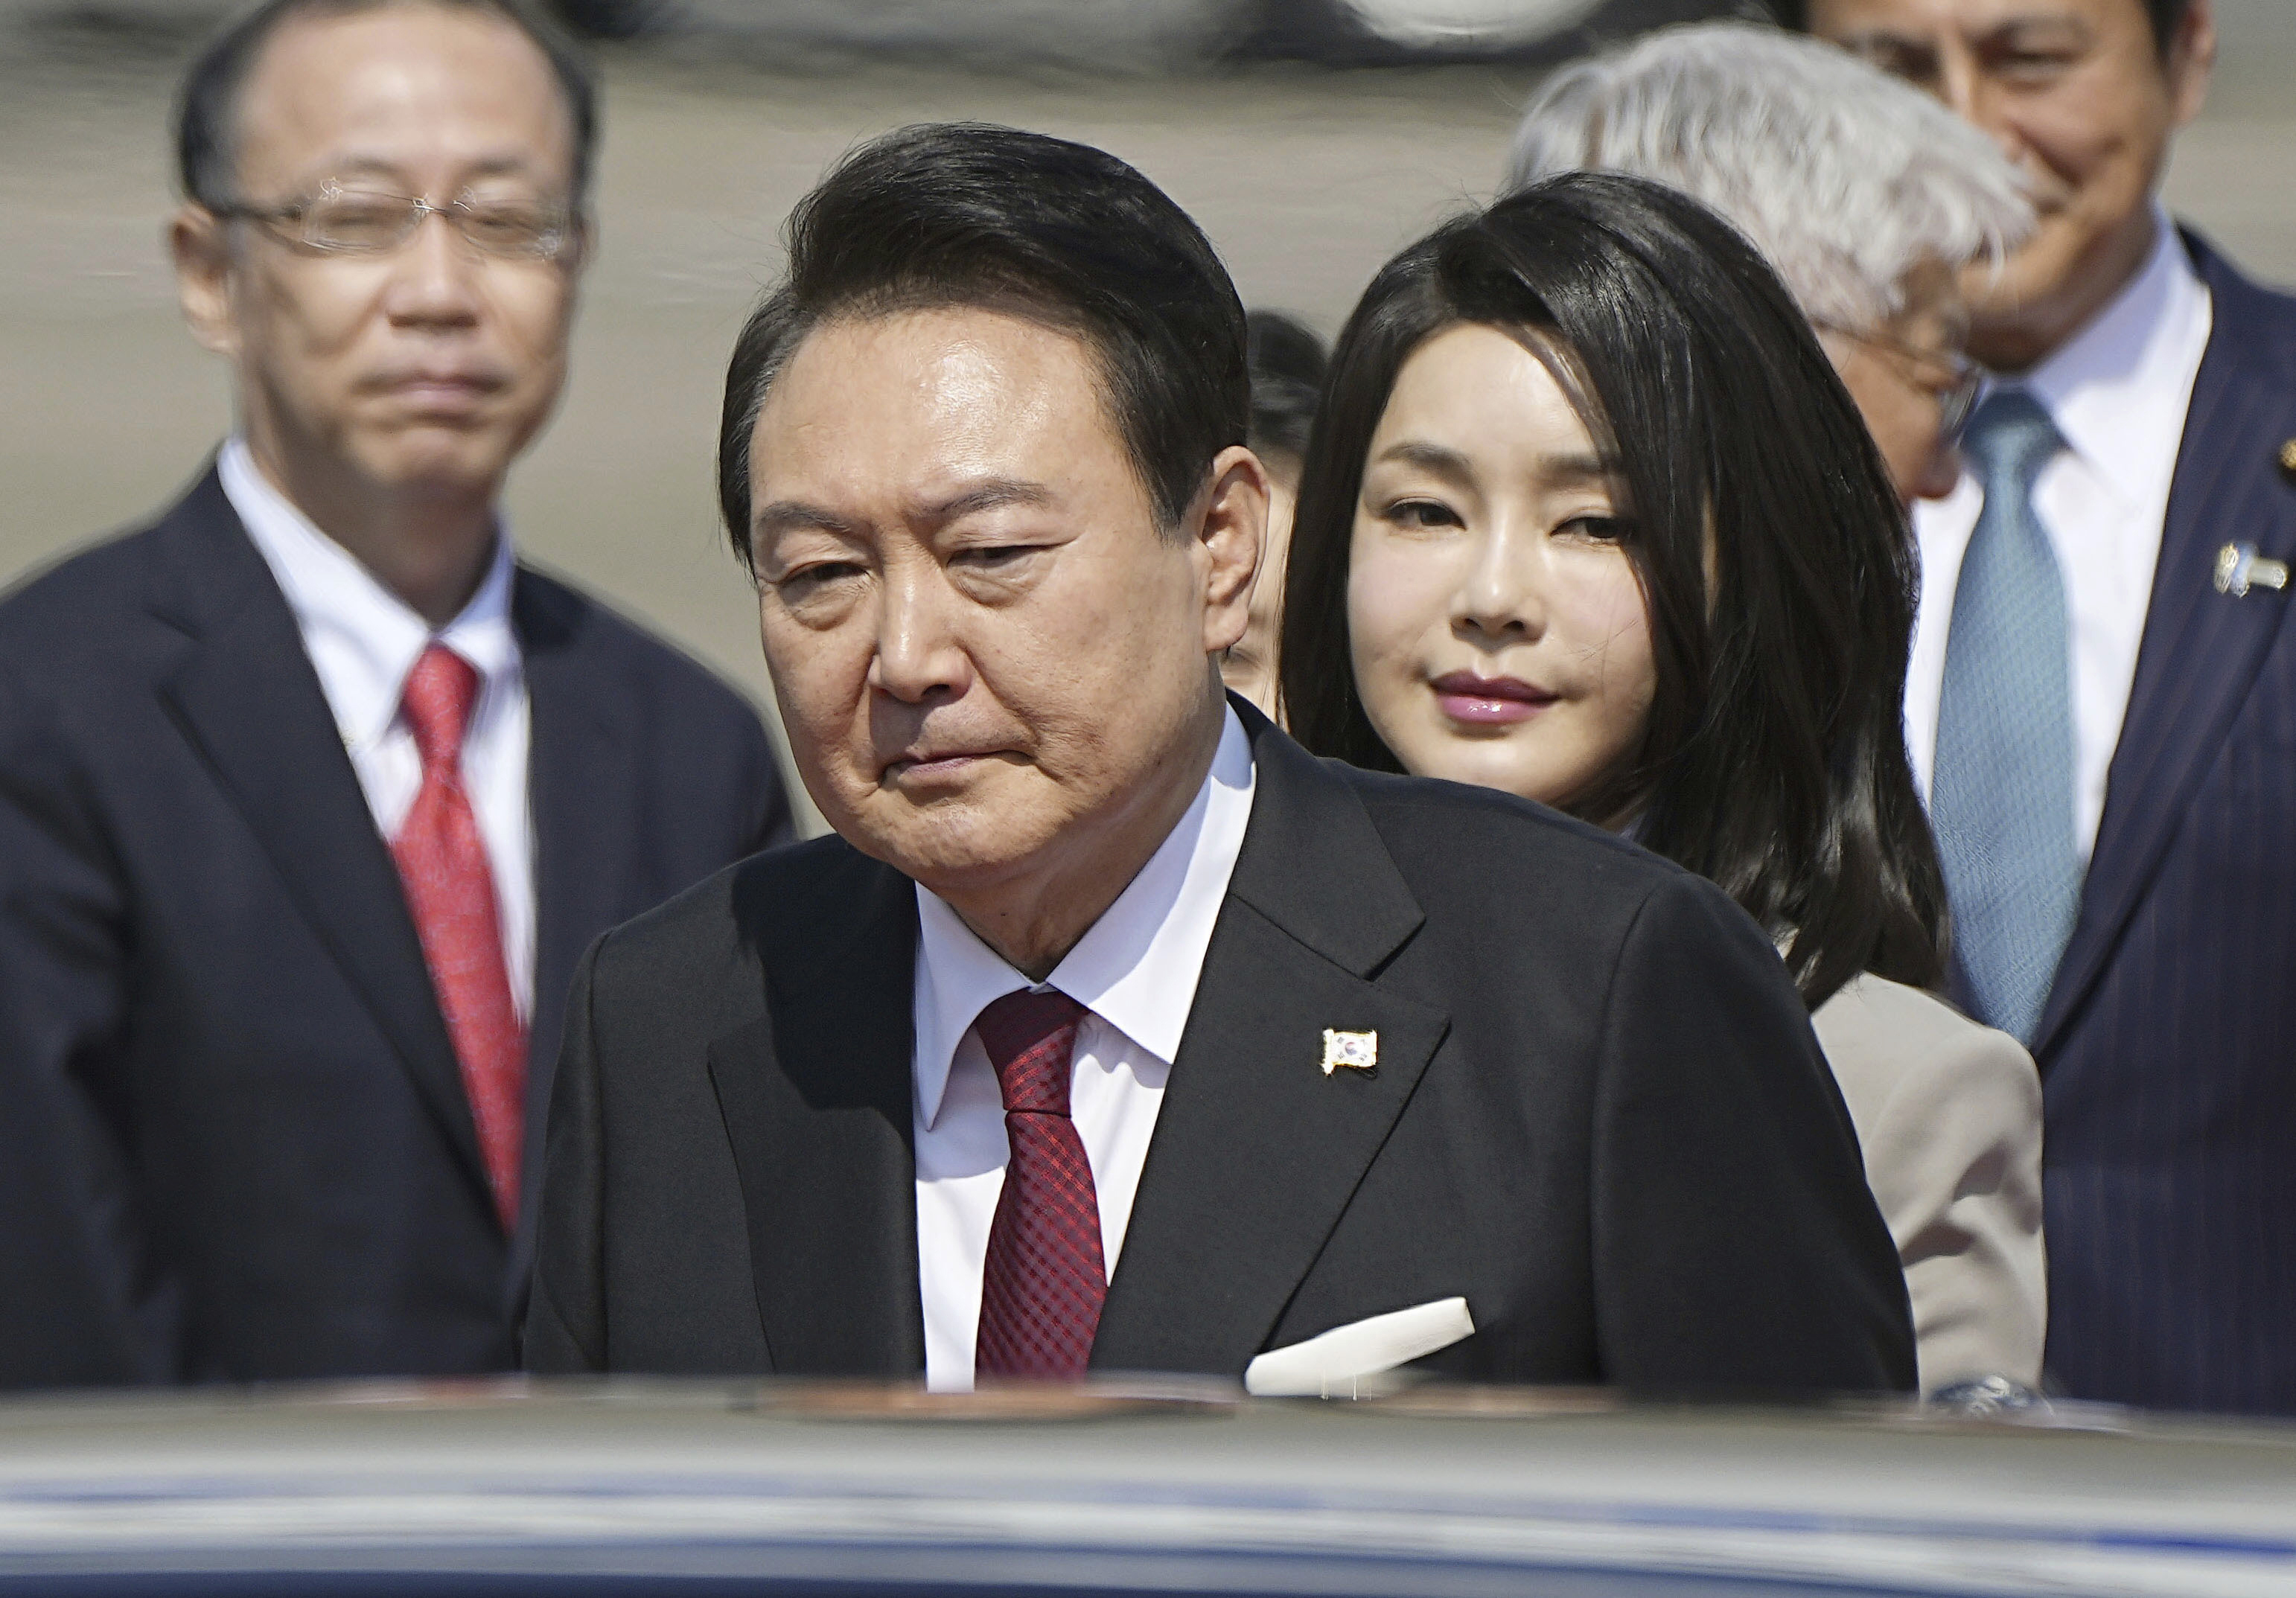 South Korean President Yoon Suk Yeol and his wife Kim Keon Hee arrive at Tokyo's Haneda International Airport, Thursday, March 16, 2023. Yoon and Japan's Prime Minister Fumio Kishida try to settle disputes milestones and rebuild economic and security ties at their meeting on Thursday, the first summit between the two countries in more than a decade.  (Yuya Shino/Kyodo News via AP)